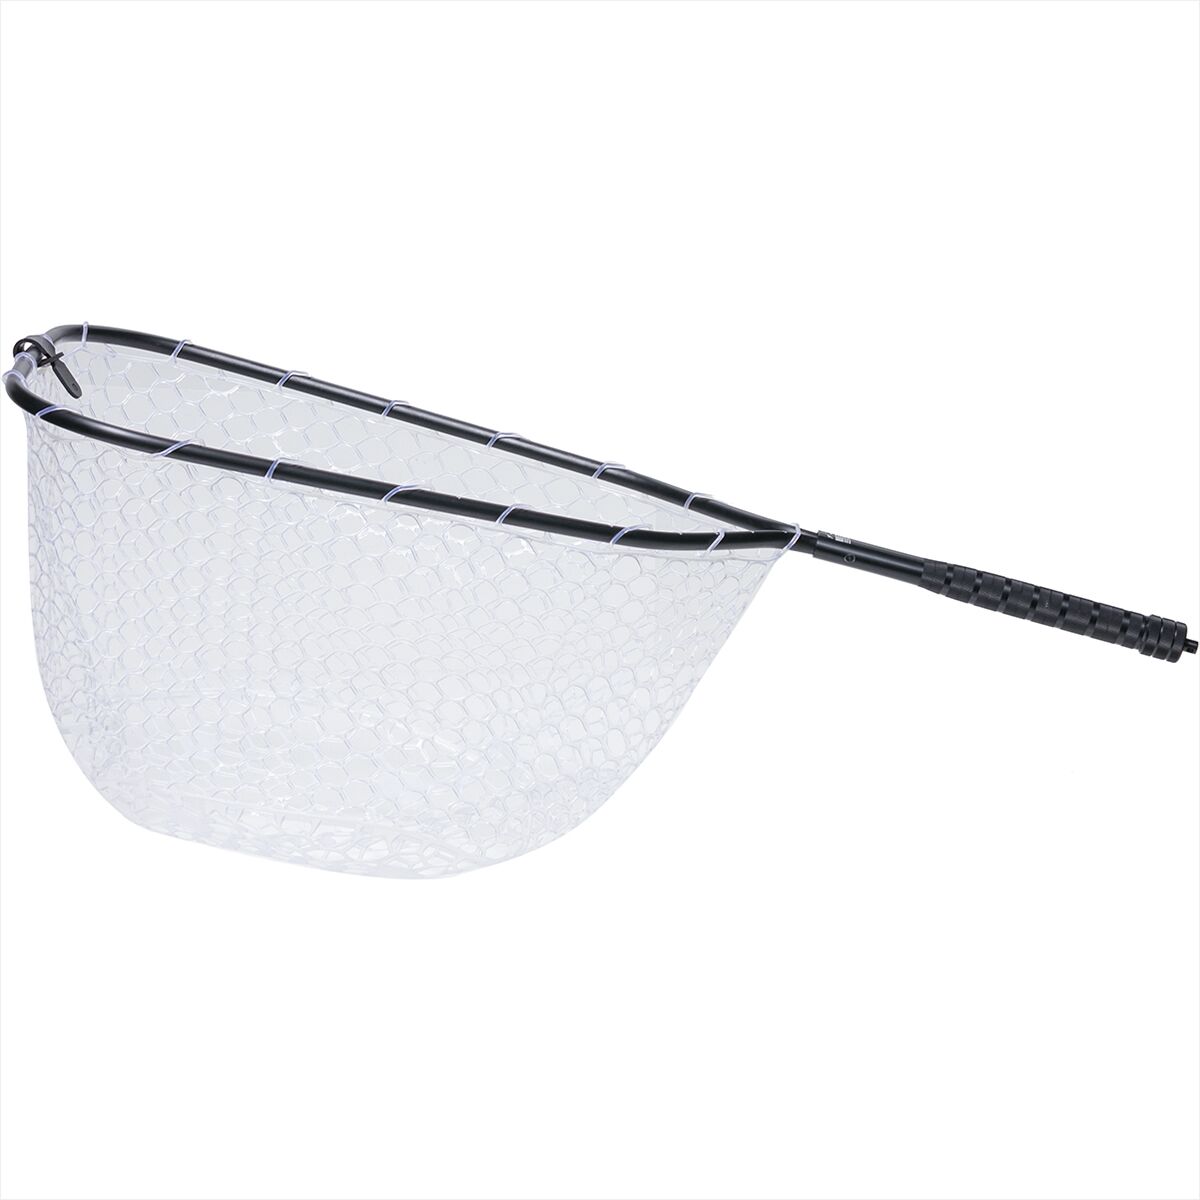 Rising Stubby Lunker 10in Handle Net - Fly Fishing